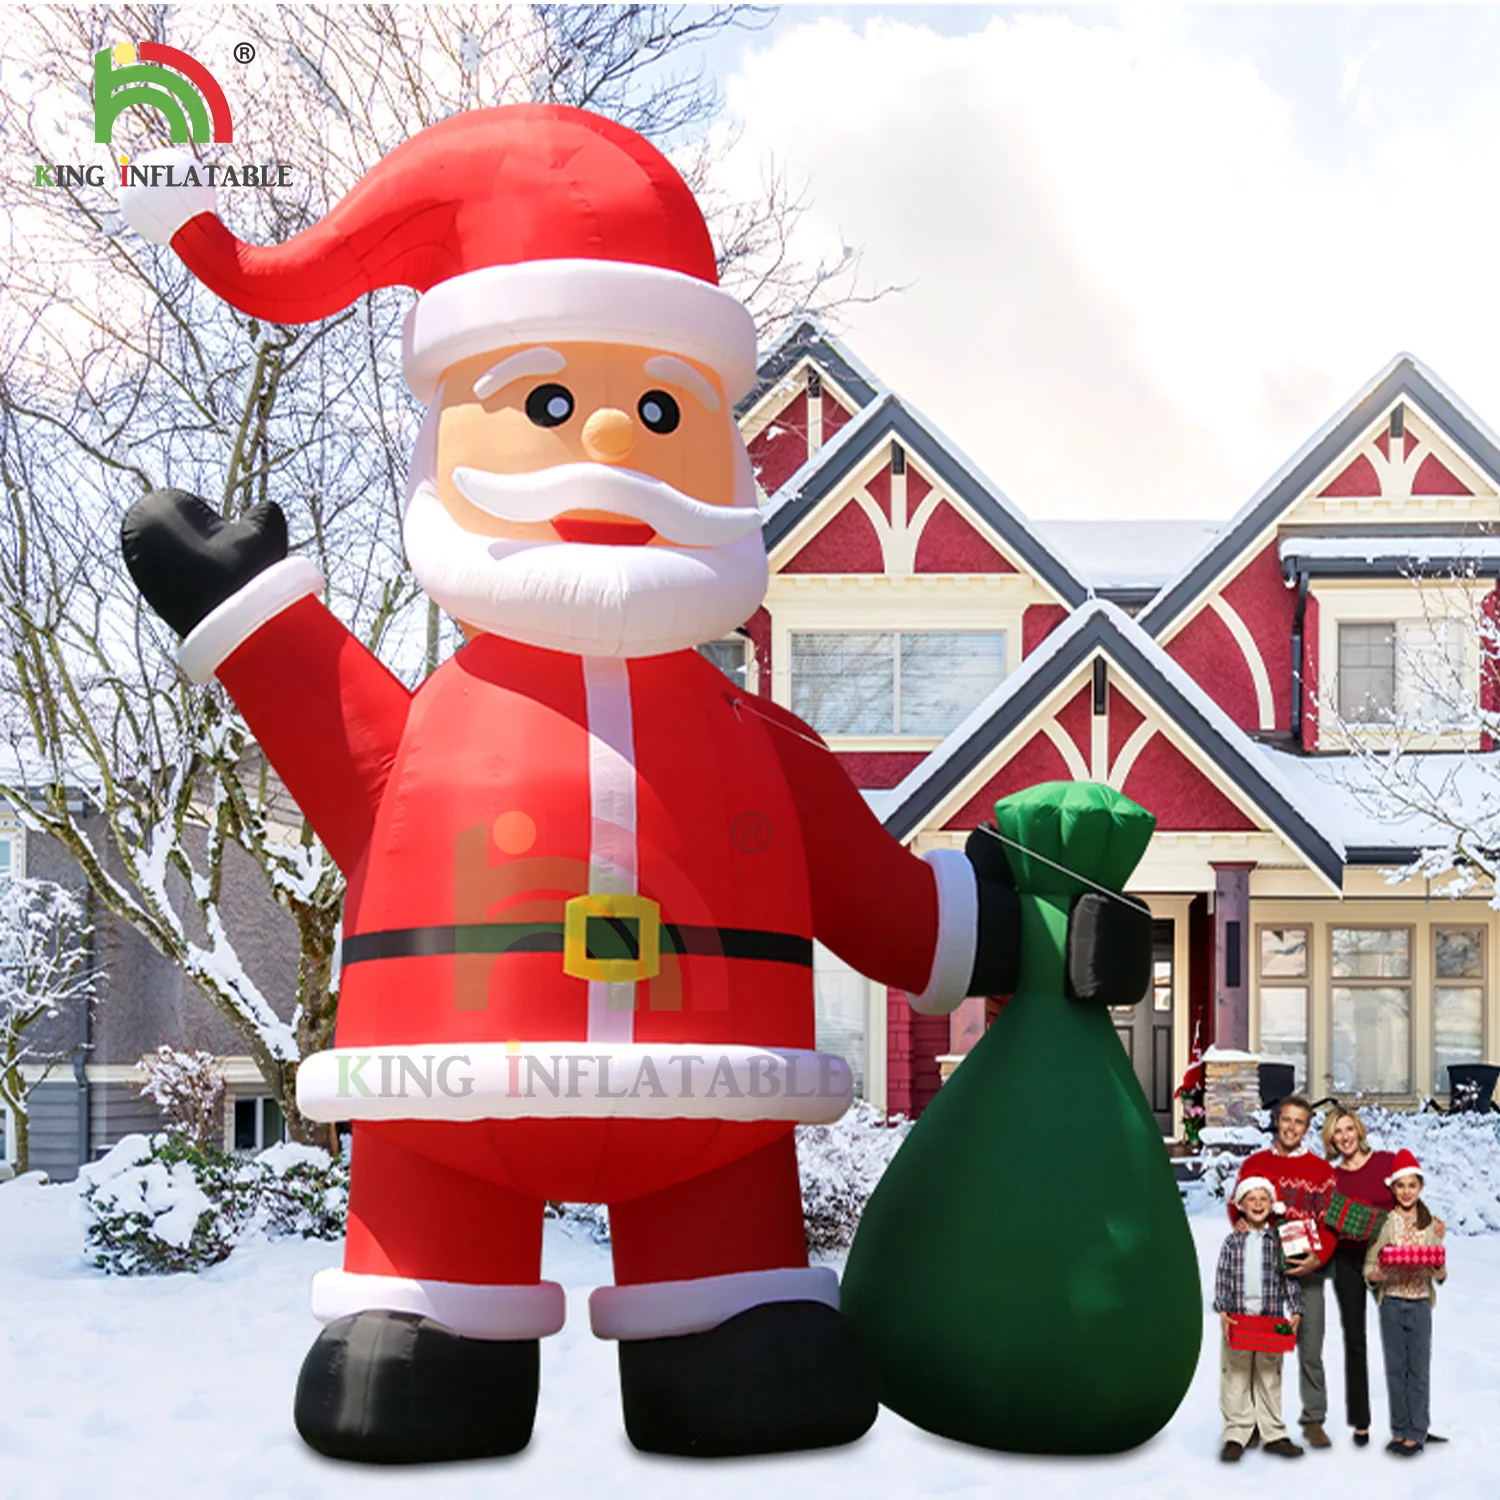 20/26/33ft Giant Inflatable Santa Claus Outdoors Christmas Father Decorations Festival Party Xmas Celebration With Blower Oxford new year holidays blow up 20ft giant inflatable snowman frozen olaf for backyard festival christmas decorations